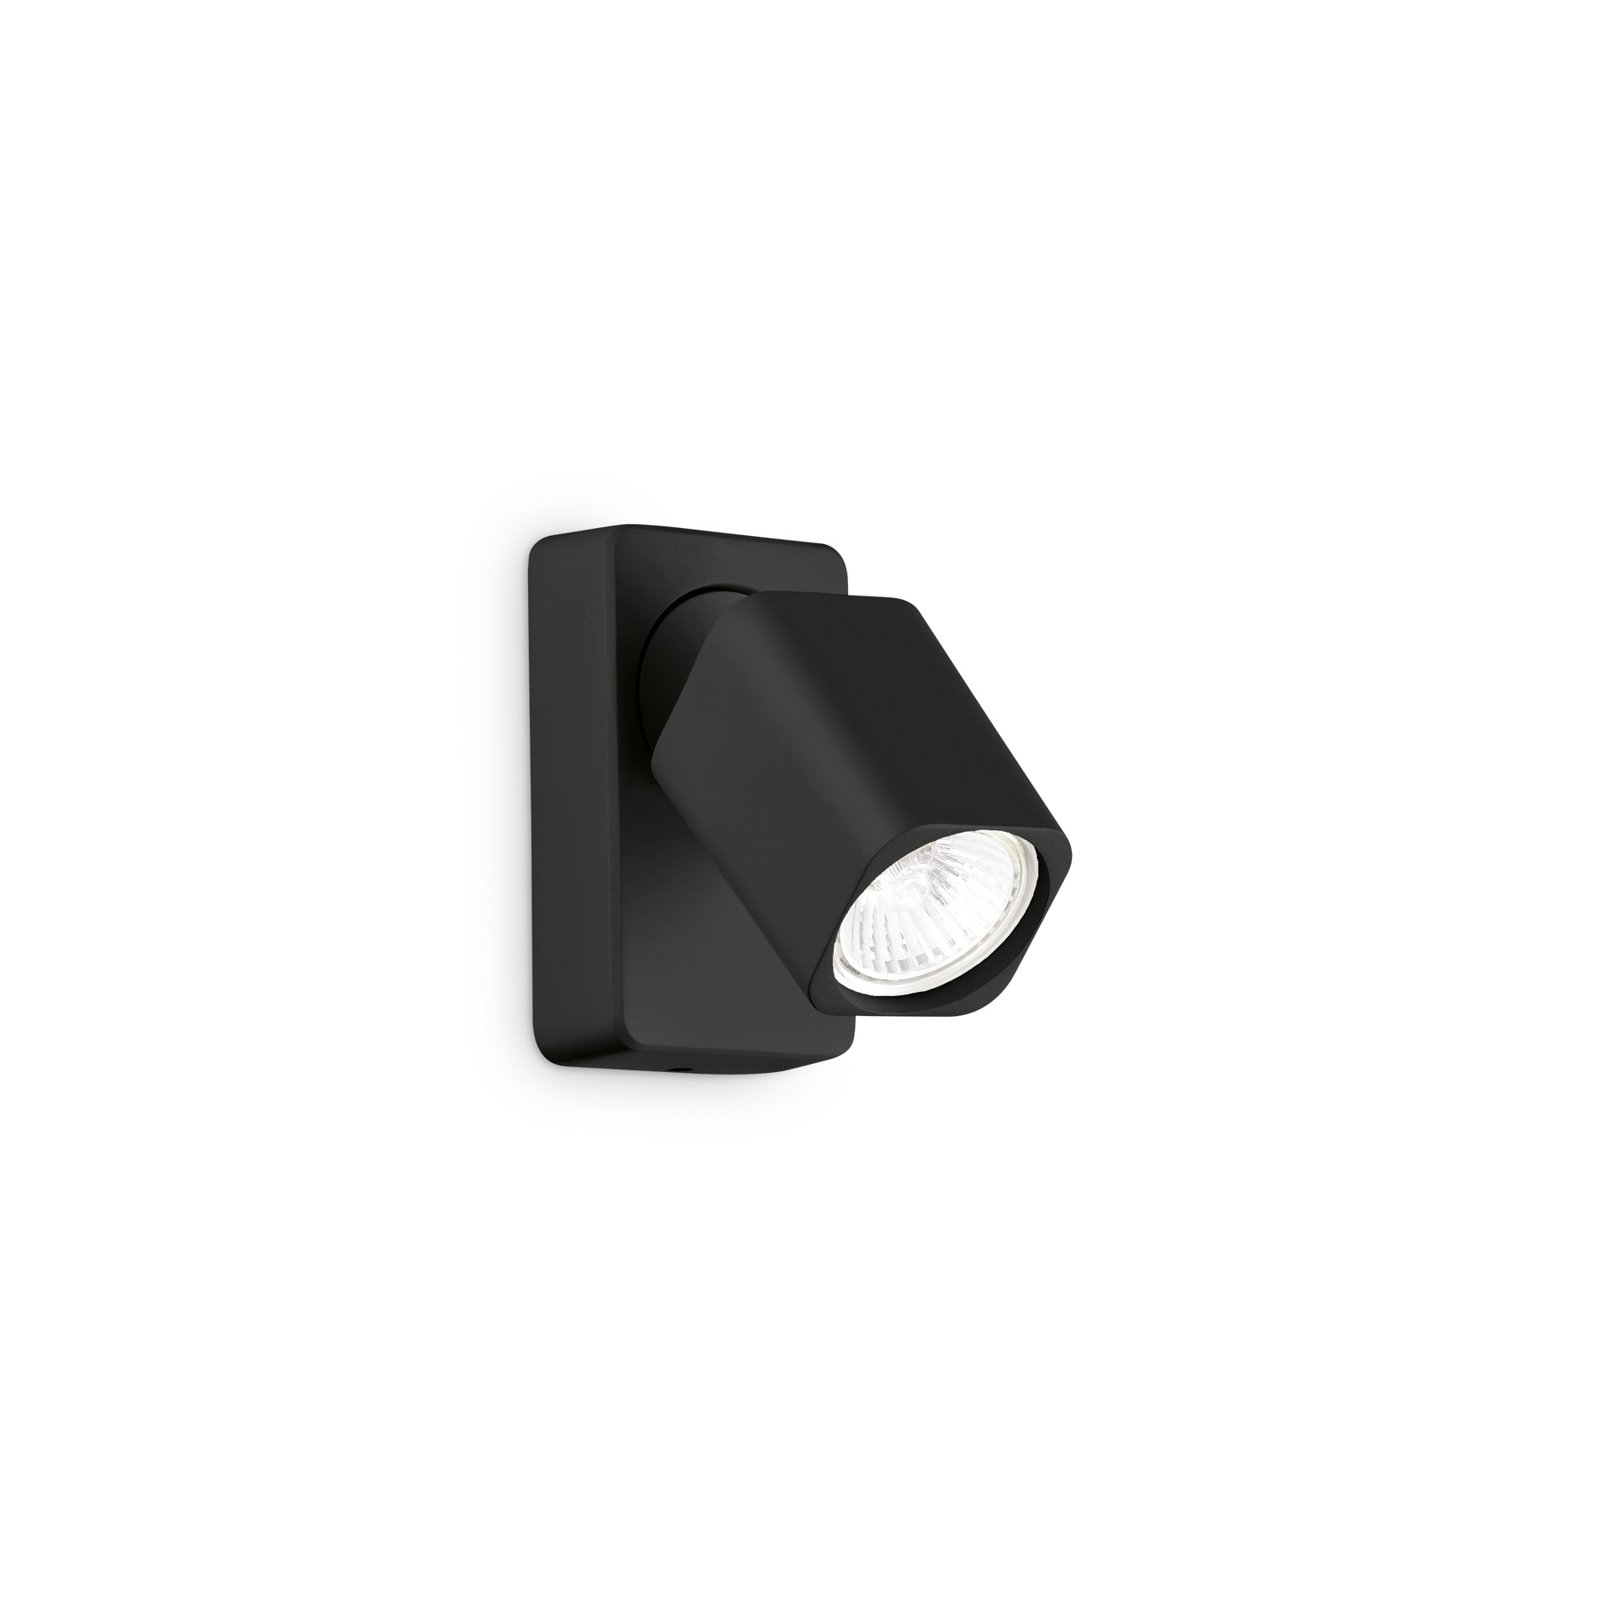 Ideal Lux Wandspot Rudy Square, schwarz, einflammig, Metall